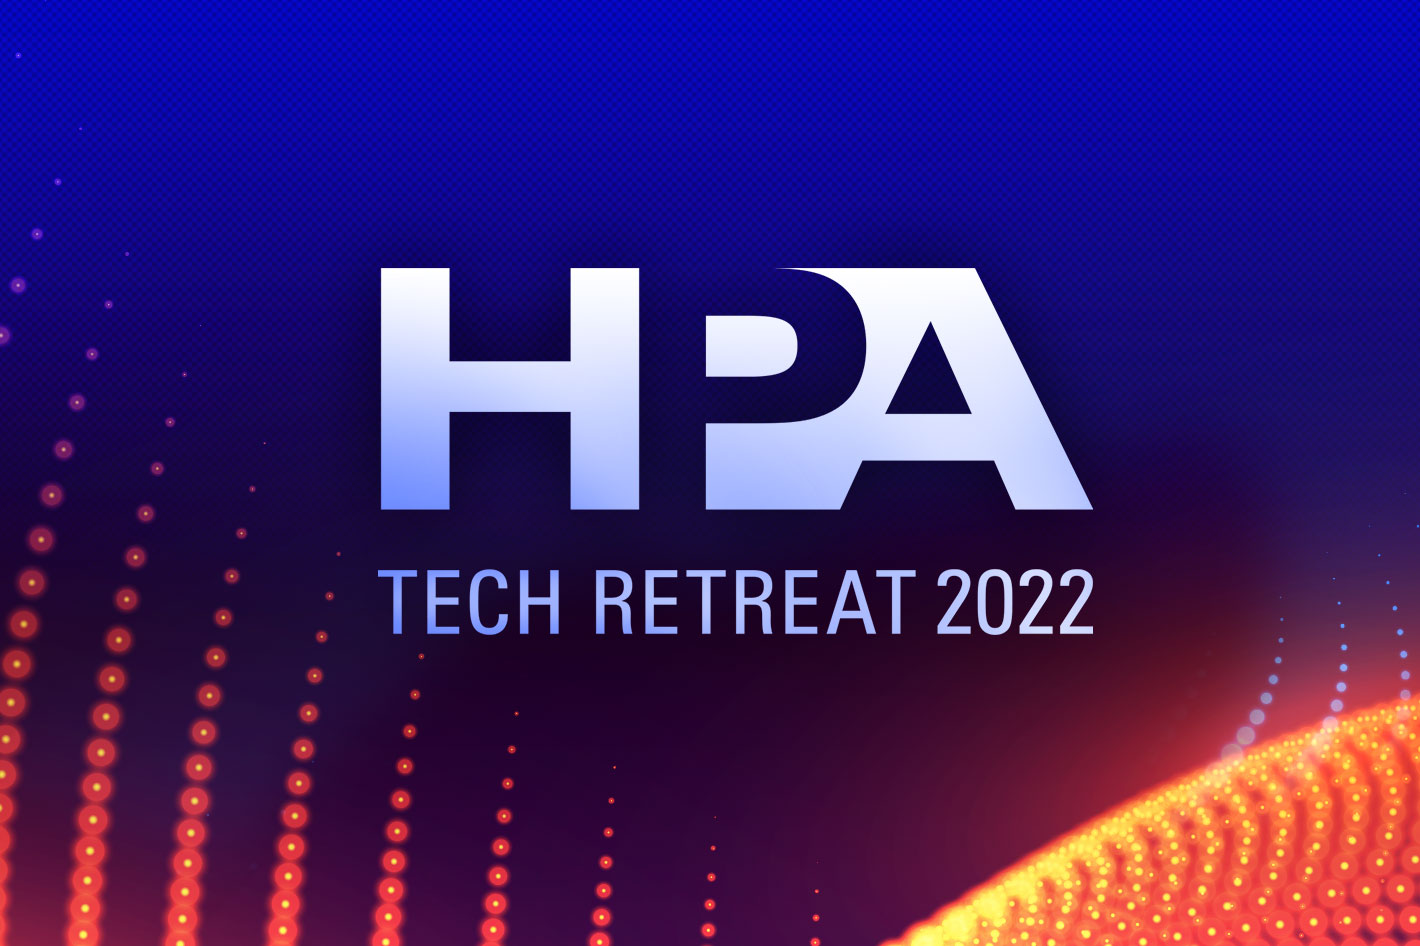 HPA Tech Retreat: enhanced health and safety protocols announced